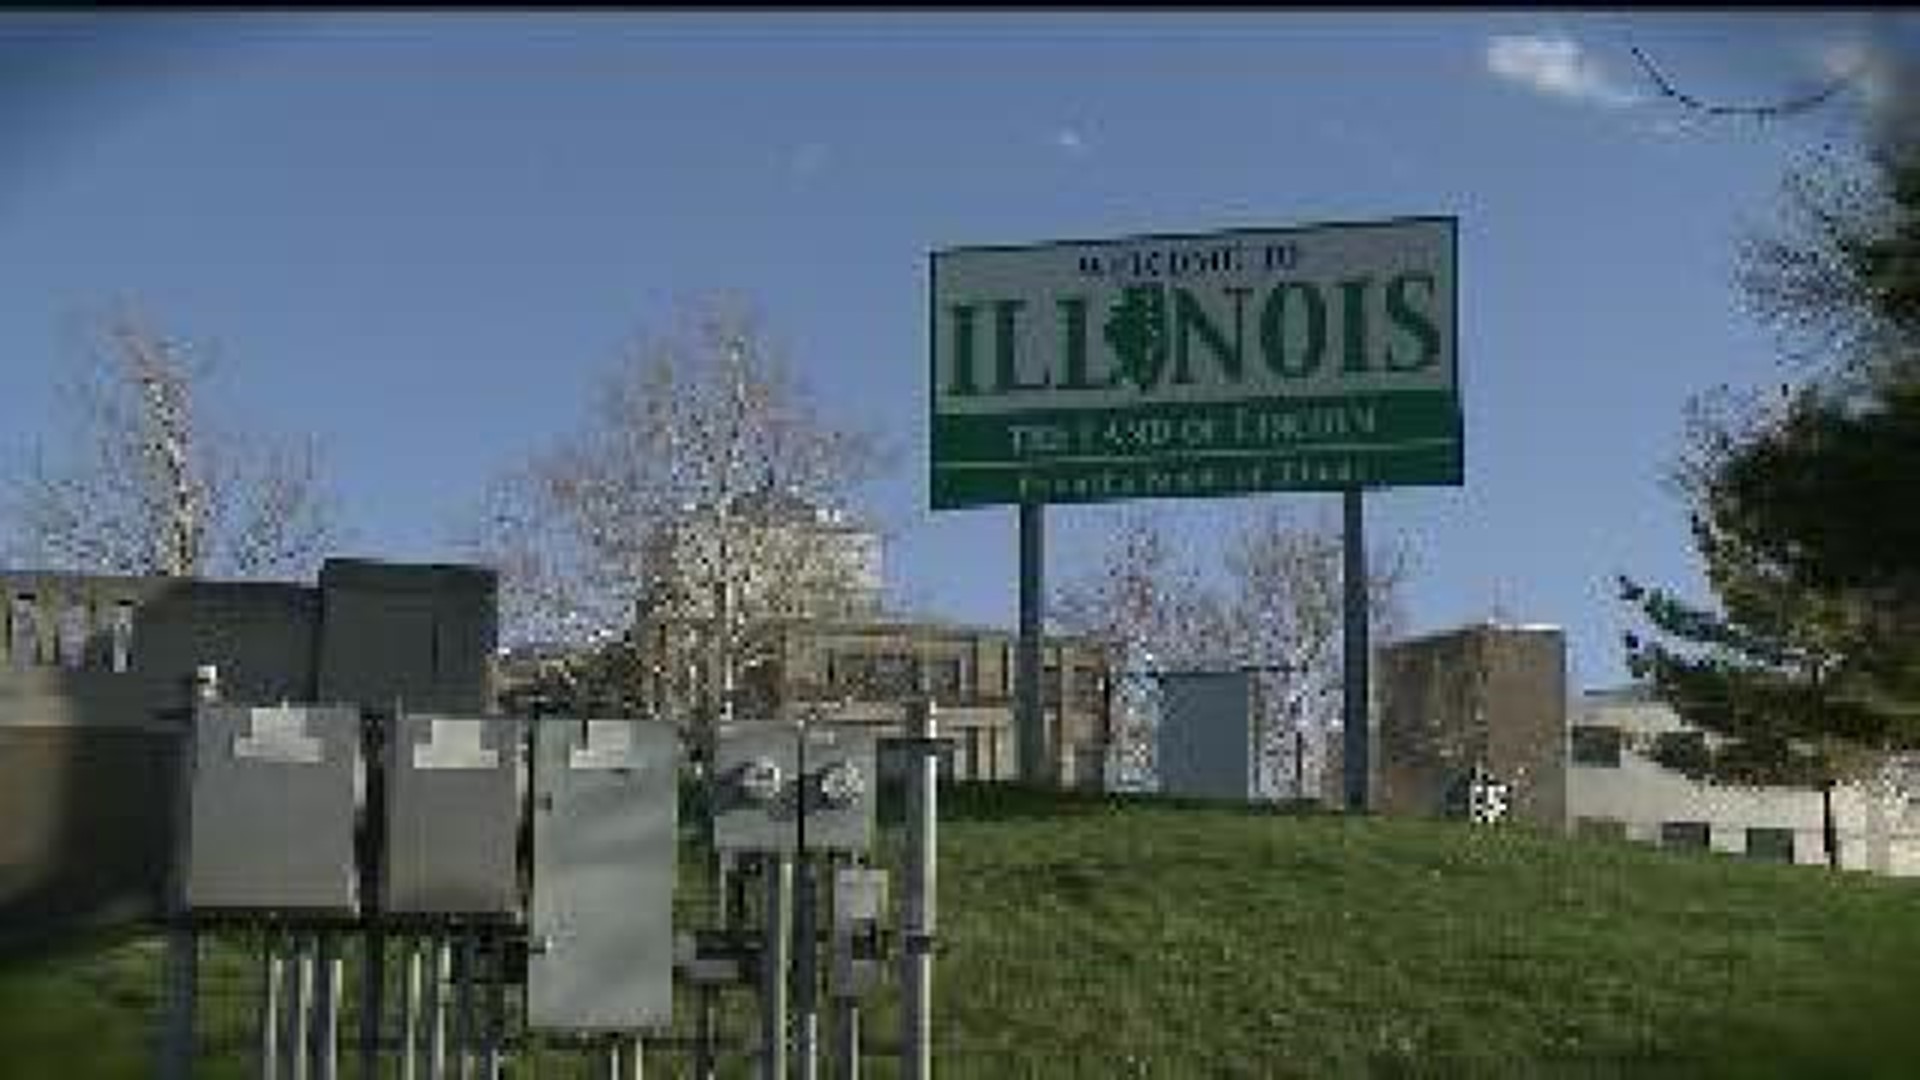 Illinois is the worst place to live, according to residents in survey